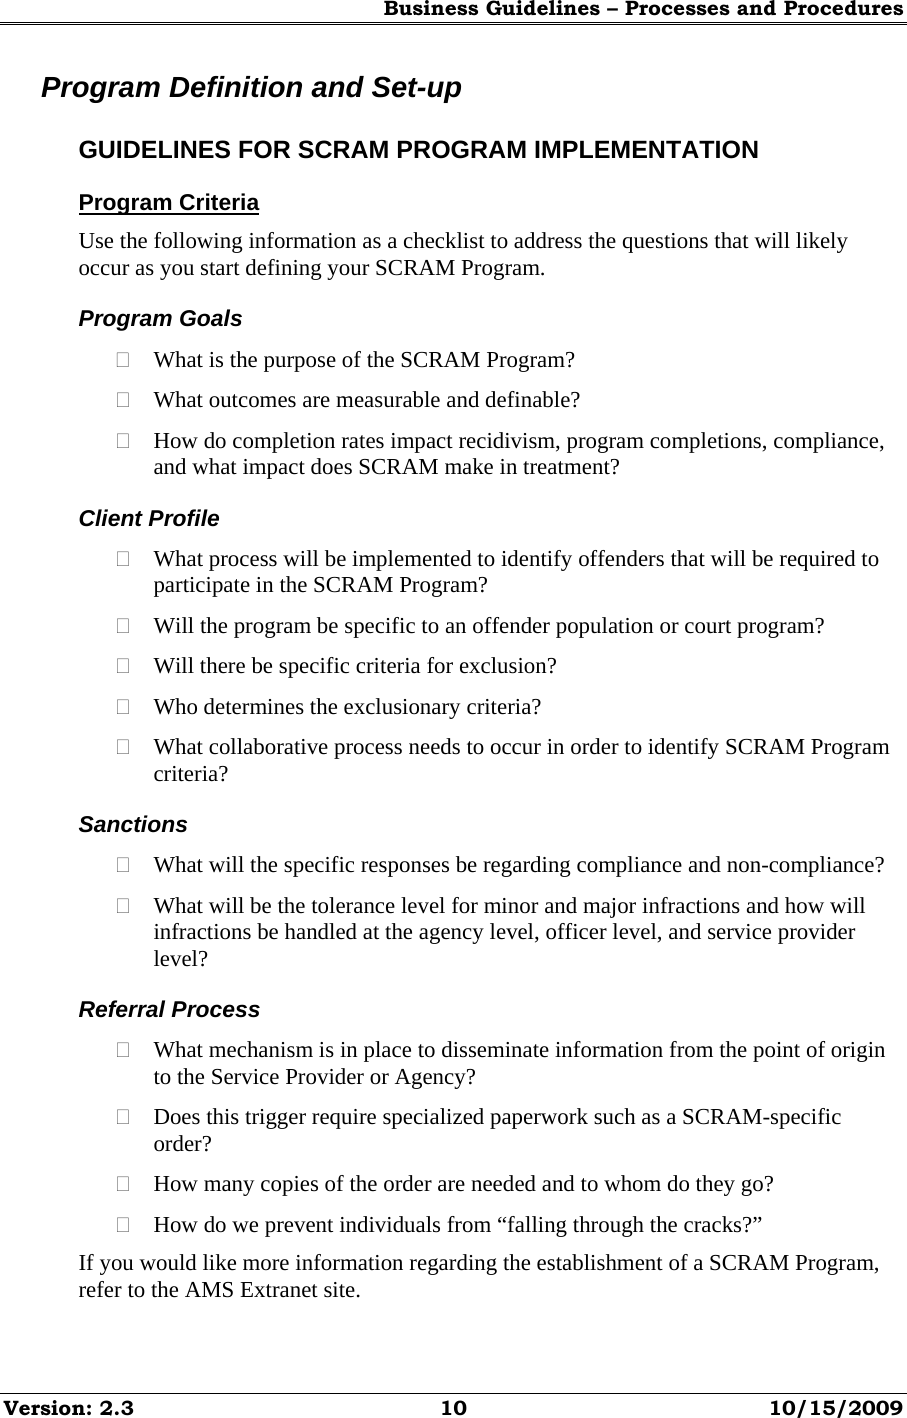 Business Guidelines – Processes and Procedures Version: 2.3  10  10/15/2009 Program Definition and Set-up GUIDELINES FOR SCRAM PROGRAM IMPLEMENTATION Program Criteria Use the following information as a checklist to address the questions that will likely occur as you start defining your SCRAM Program. Program Goals  What is the purpose of the SCRAM Program?  What outcomes are measurable and definable?  How do completion rates impact recidivism, program completions, compliance, and what impact does SCRAM make in treatment? Client Profile  What process will be implemented to identify offenders that will be required to participate in the SCRAM Program?  Will the program be specific to an offender population or court program?  Will there be specific criteria for exclusion?  Who determines the exclusionary criteria?  What collaborative process needs to occur in order to identify SCRAM Program criteria? Sanctions  What will the specific responses be regarding compliance and non-compliance?  What will be the tolerance level for minor and major infractions and how will infractions be handled at the agency level, officer level, and service provider level? Referral Process  What mechanism is in place to disseminate information from the point of origin to the Service Provider or Agency?  Does this trigger require specialized paperwork such as a SCRAM-specific order?  How many copies of the order are needed and to whom do they go?  How do we prevent individuals from “falling through the cracks?” If you would like more information regarding the establishment of a SCRAM Program, refer to the AMS Extranet site. 